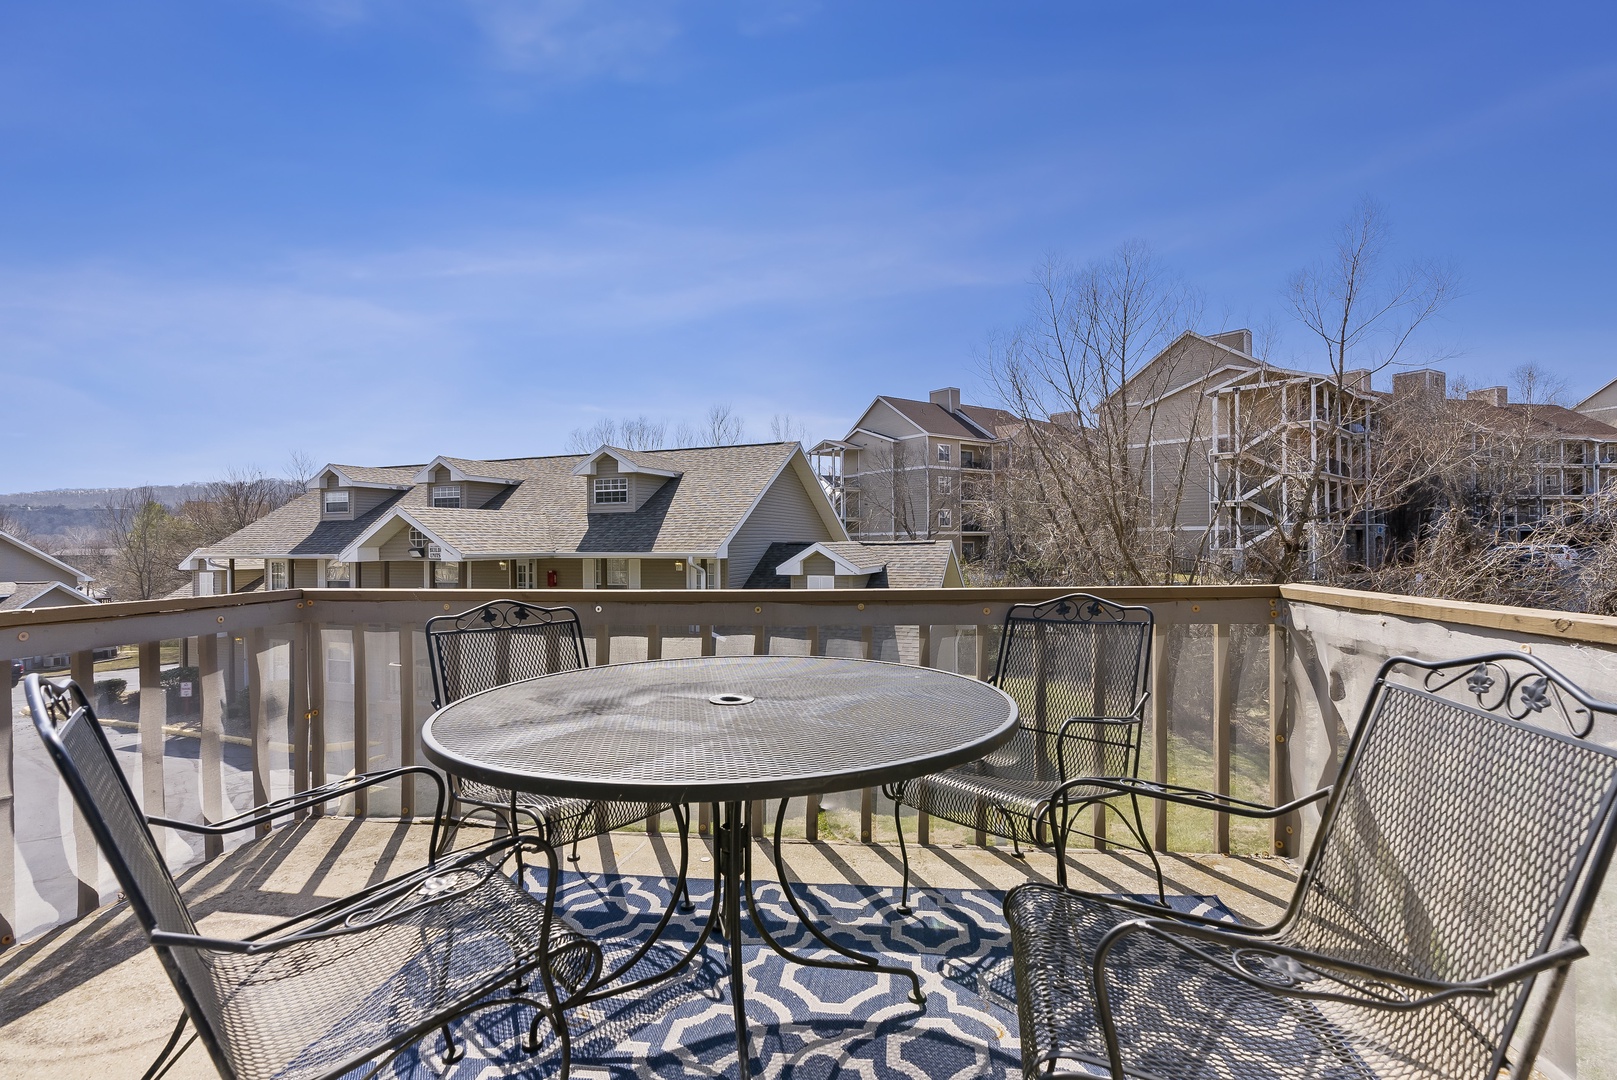 Take in the fresh air on the deck with outdoor seating